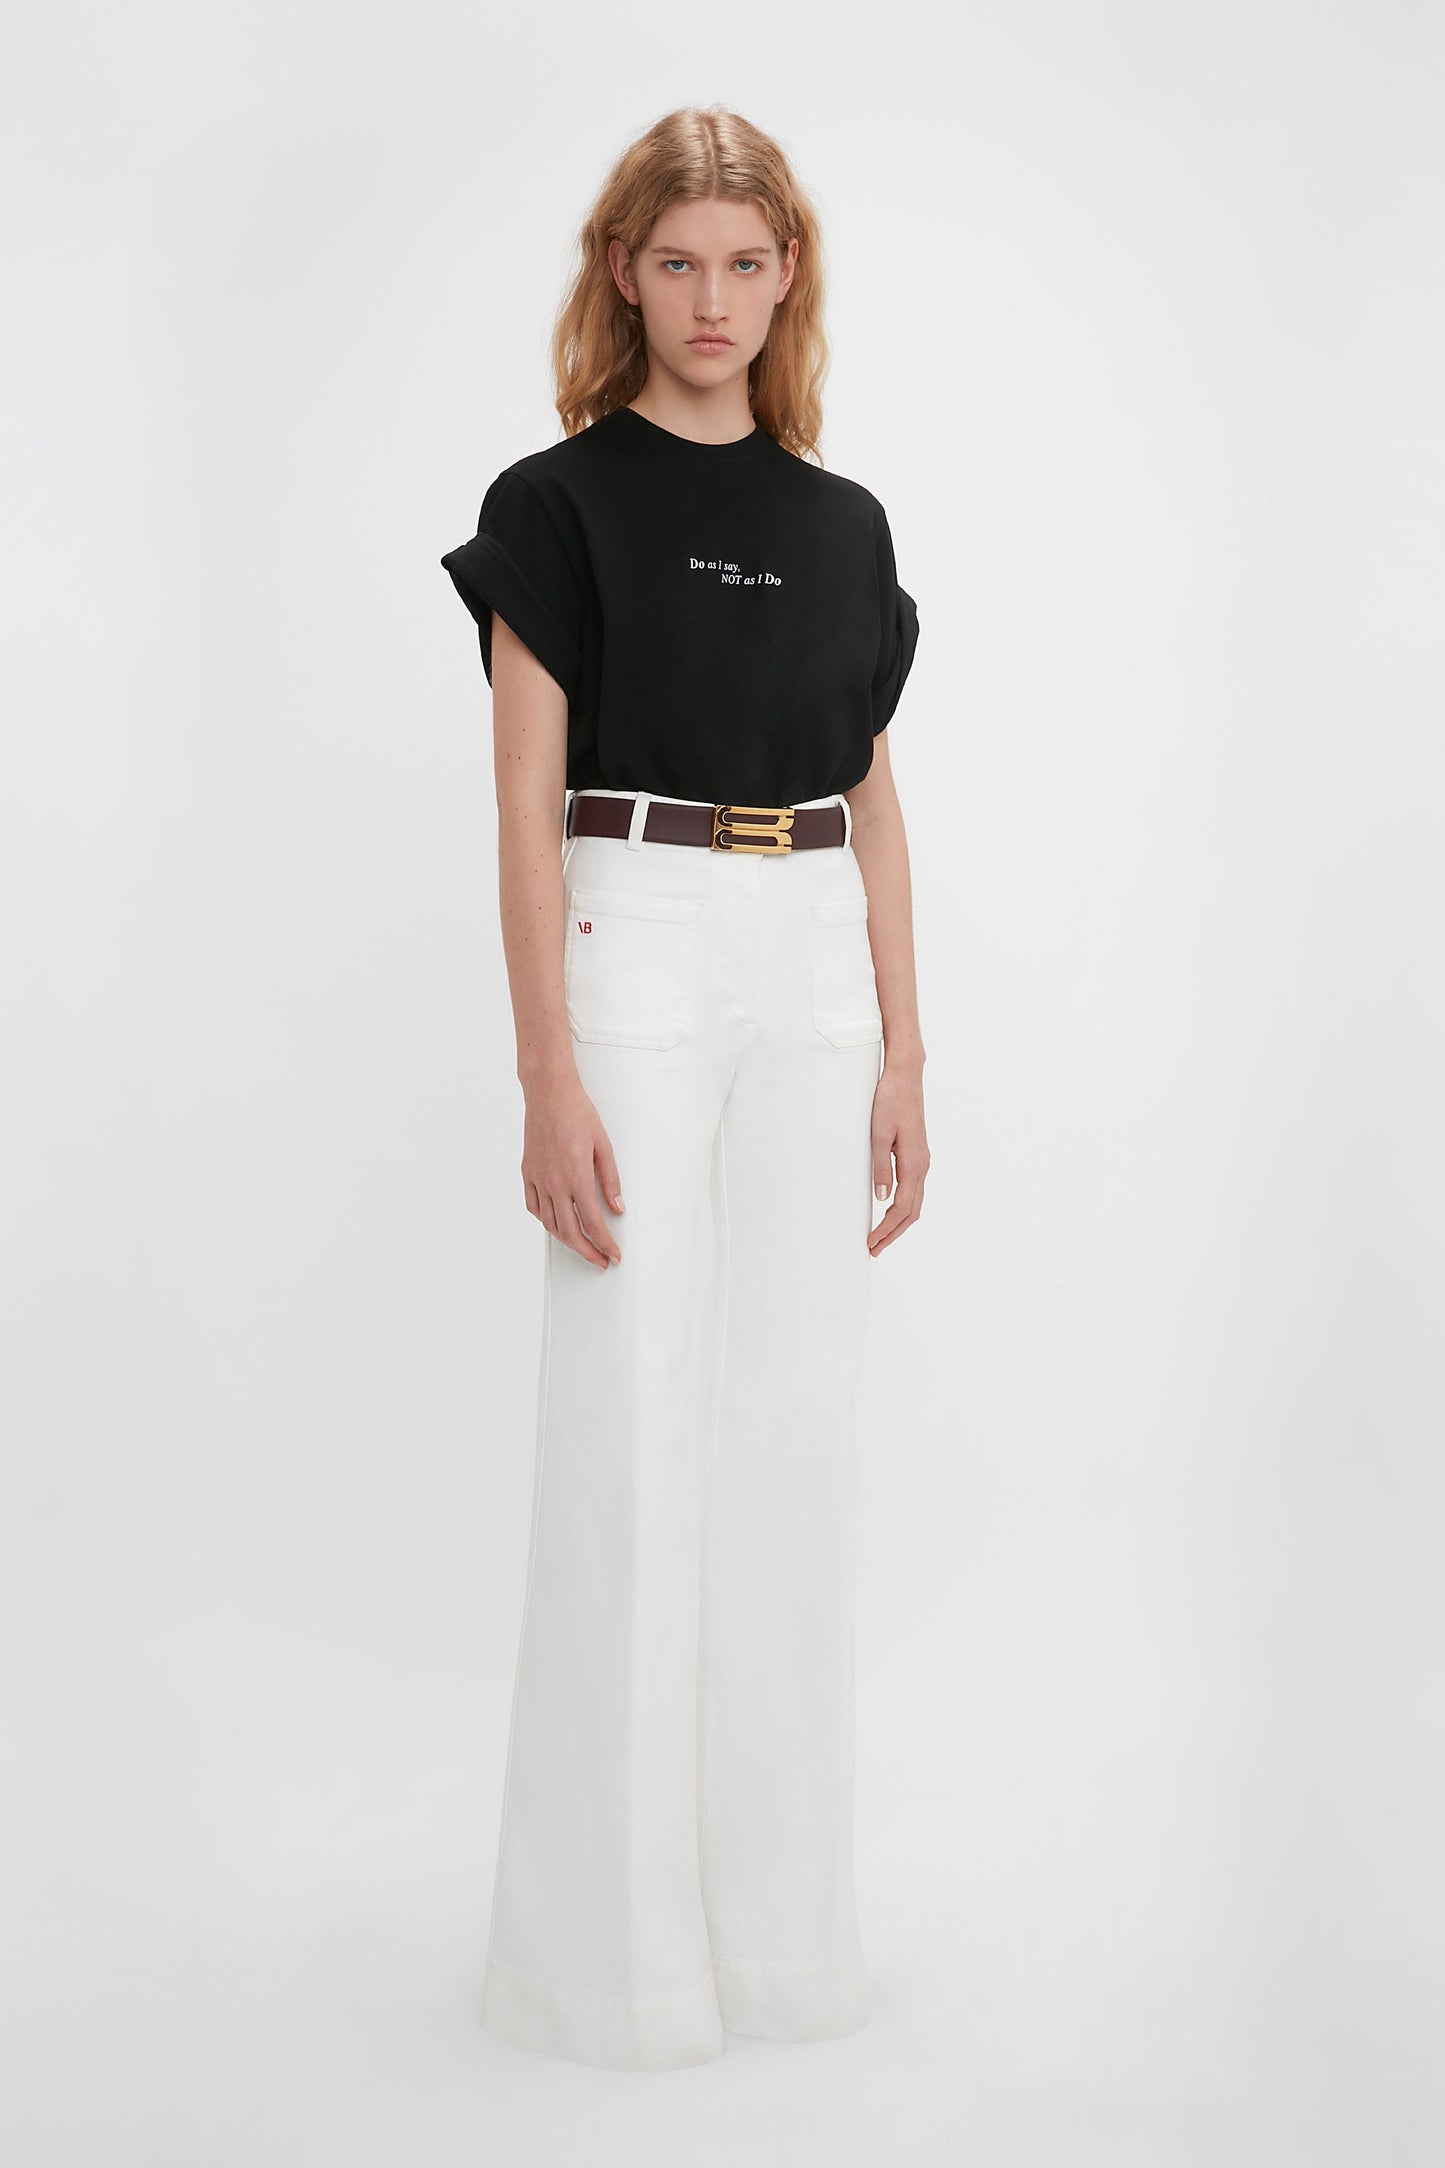 A woman wearing a black 'Do As I Say, Not As I Do' Slogan T-shirt by Victoria Beckham and white high-waisted flared jeans with a slim brown belt, standing against a plain white background.